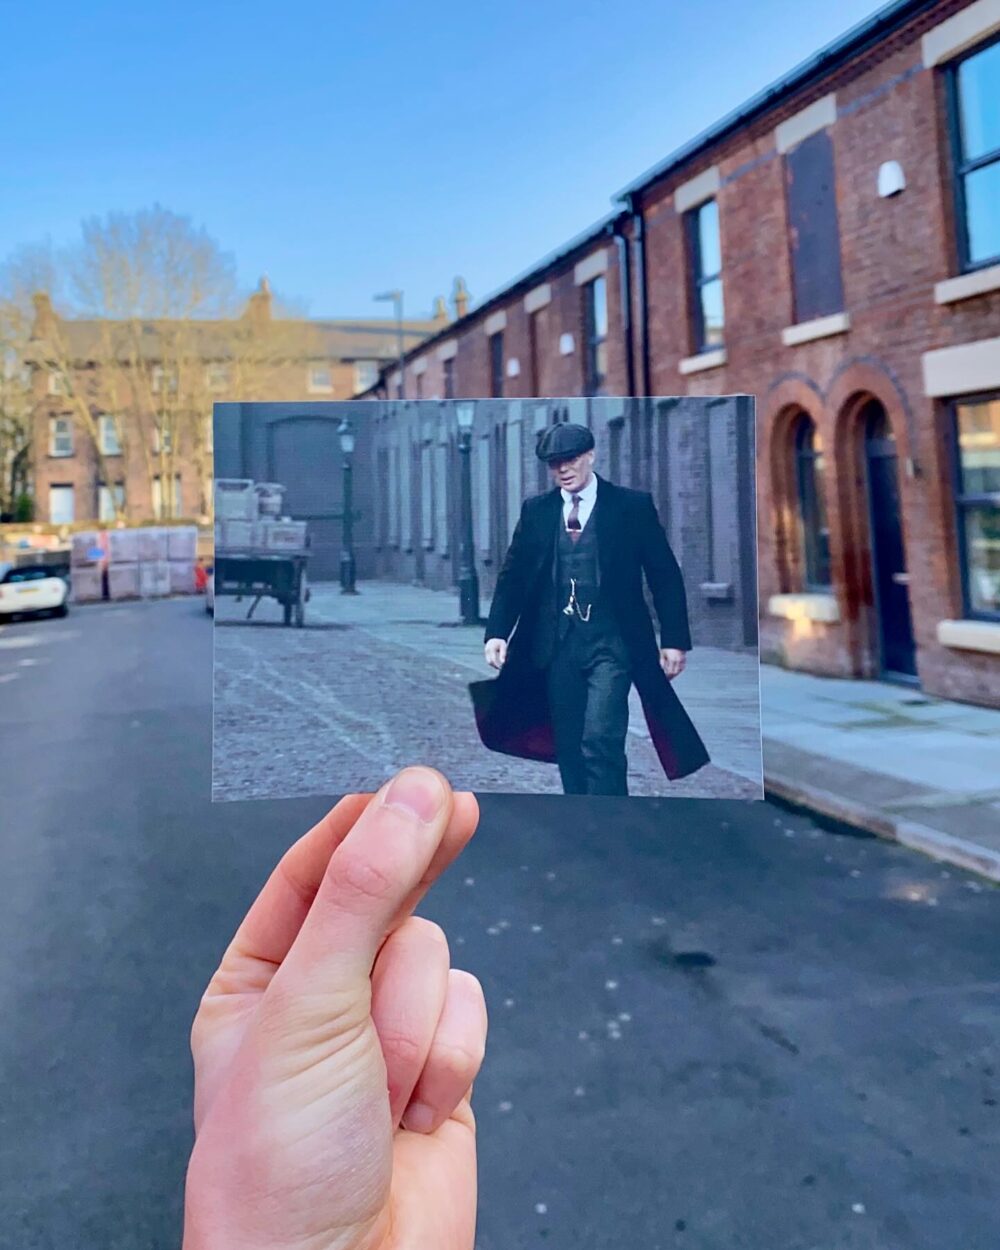 Tommy Shelby on Powis Street - image Stepping Through Film